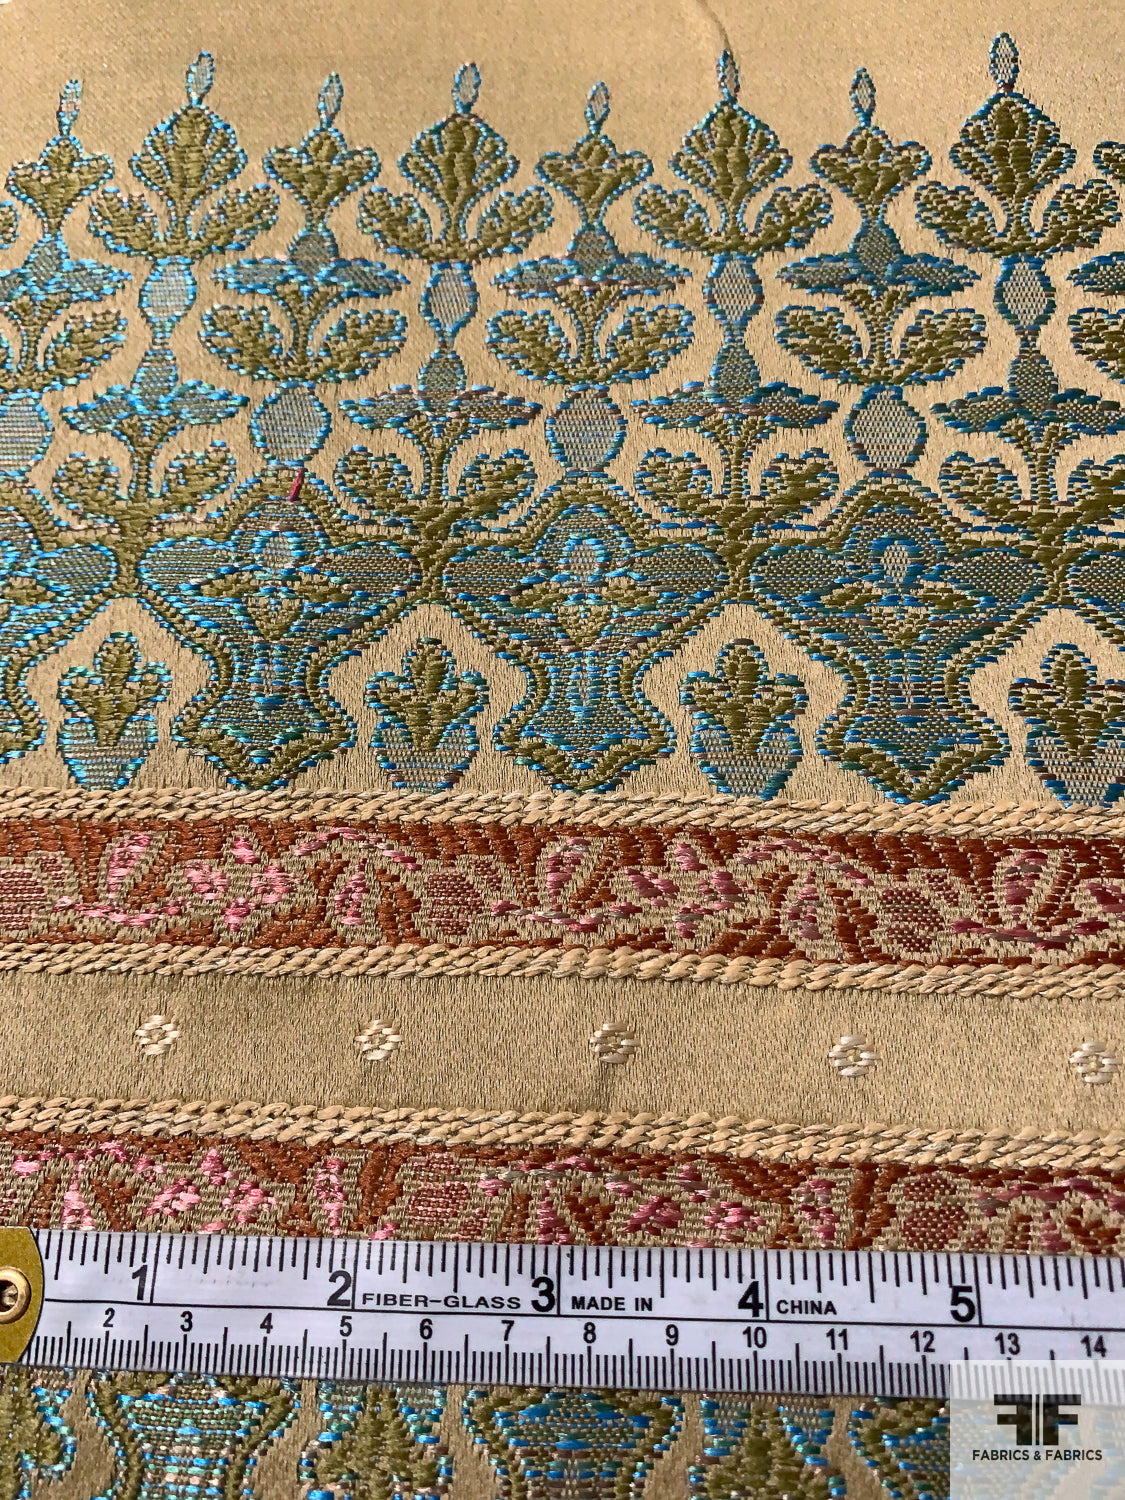 Antique-Look Upholstery Weight Brocade - Ecru / Turquoise / Antique Red